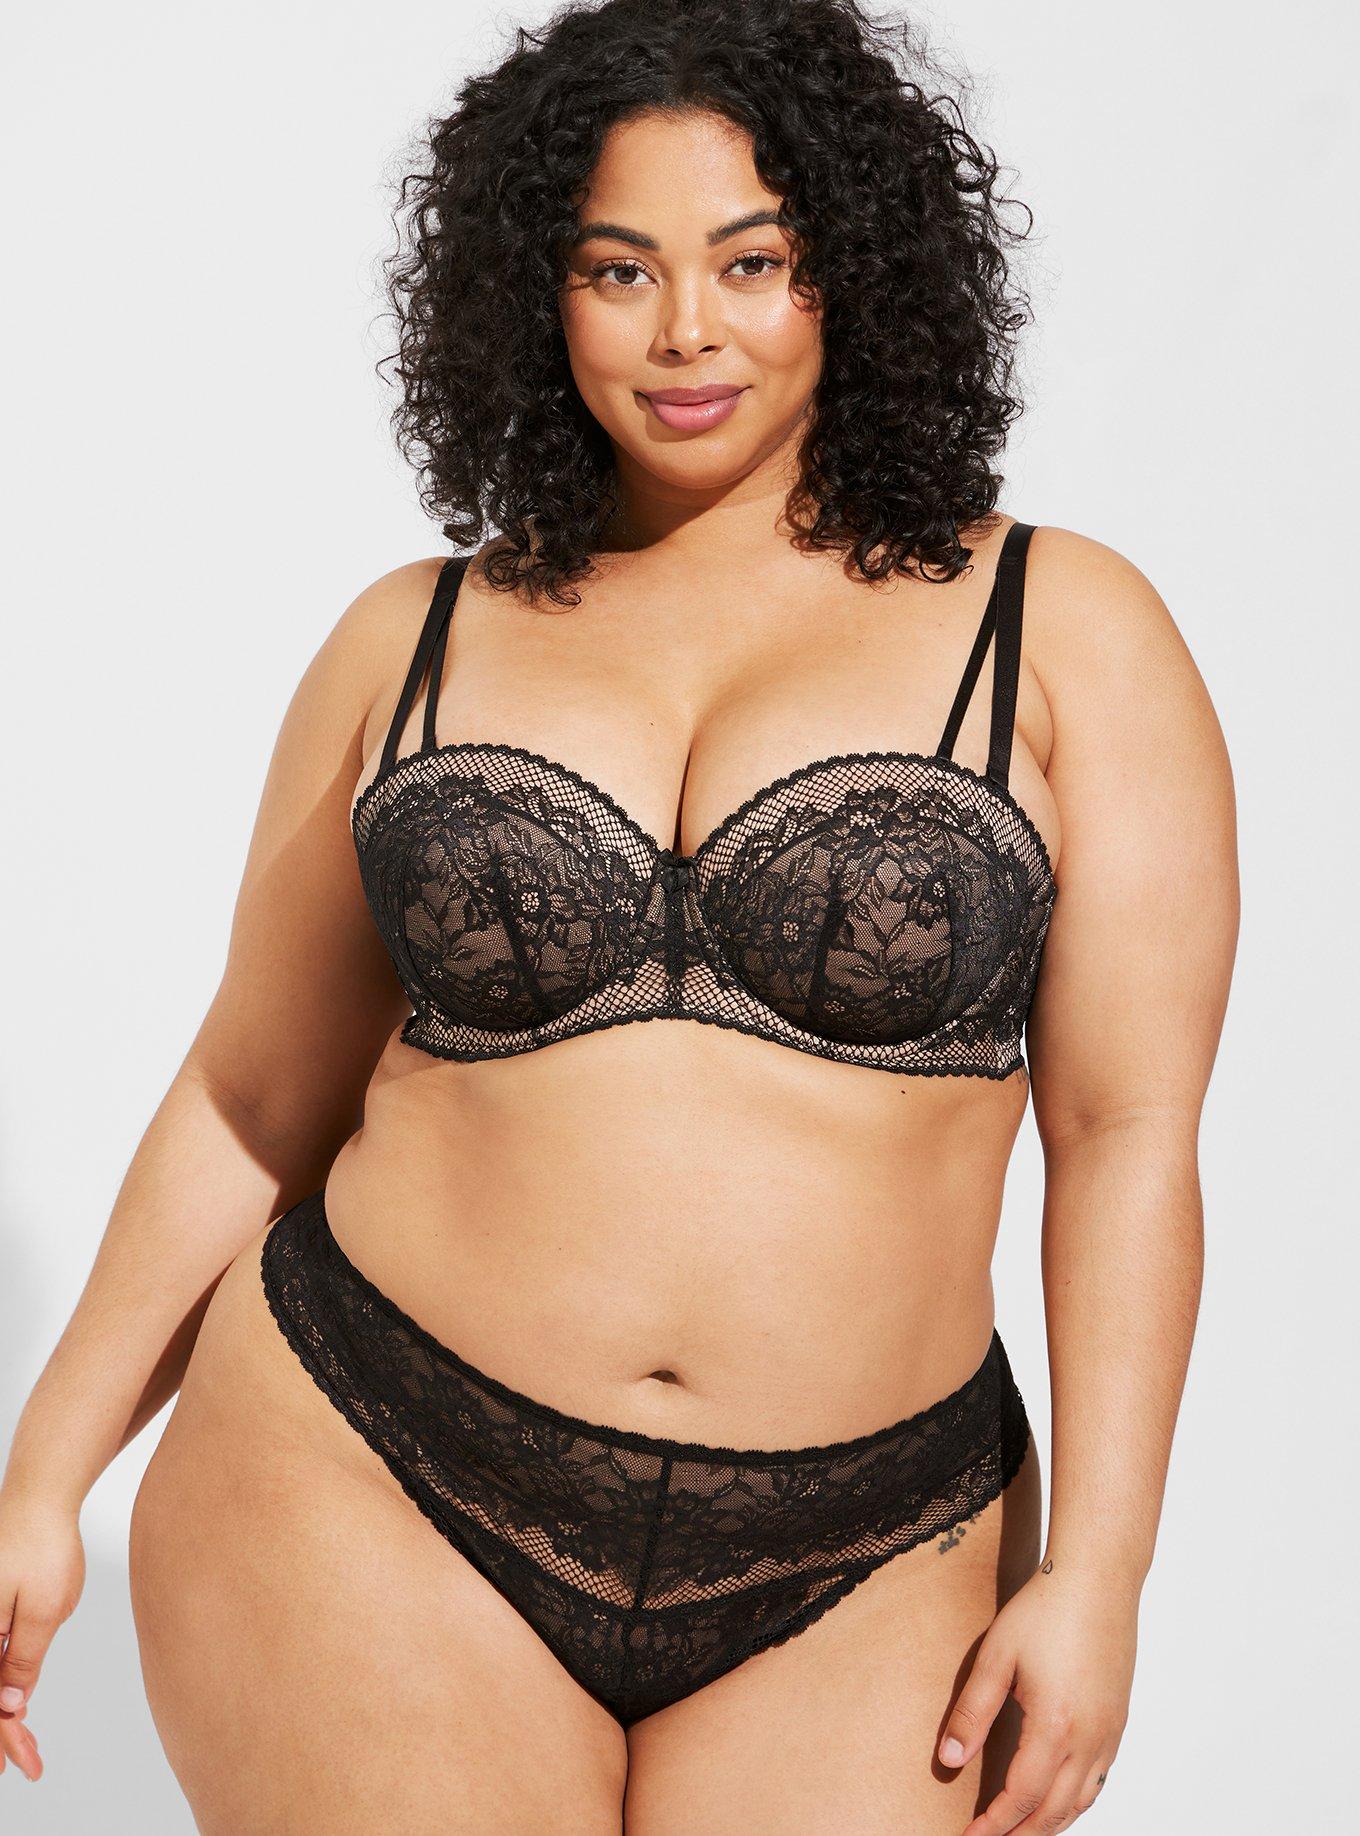 sexy BE WICKED sheer UNDERWIRE lace THONG back CUTOUT half CUP